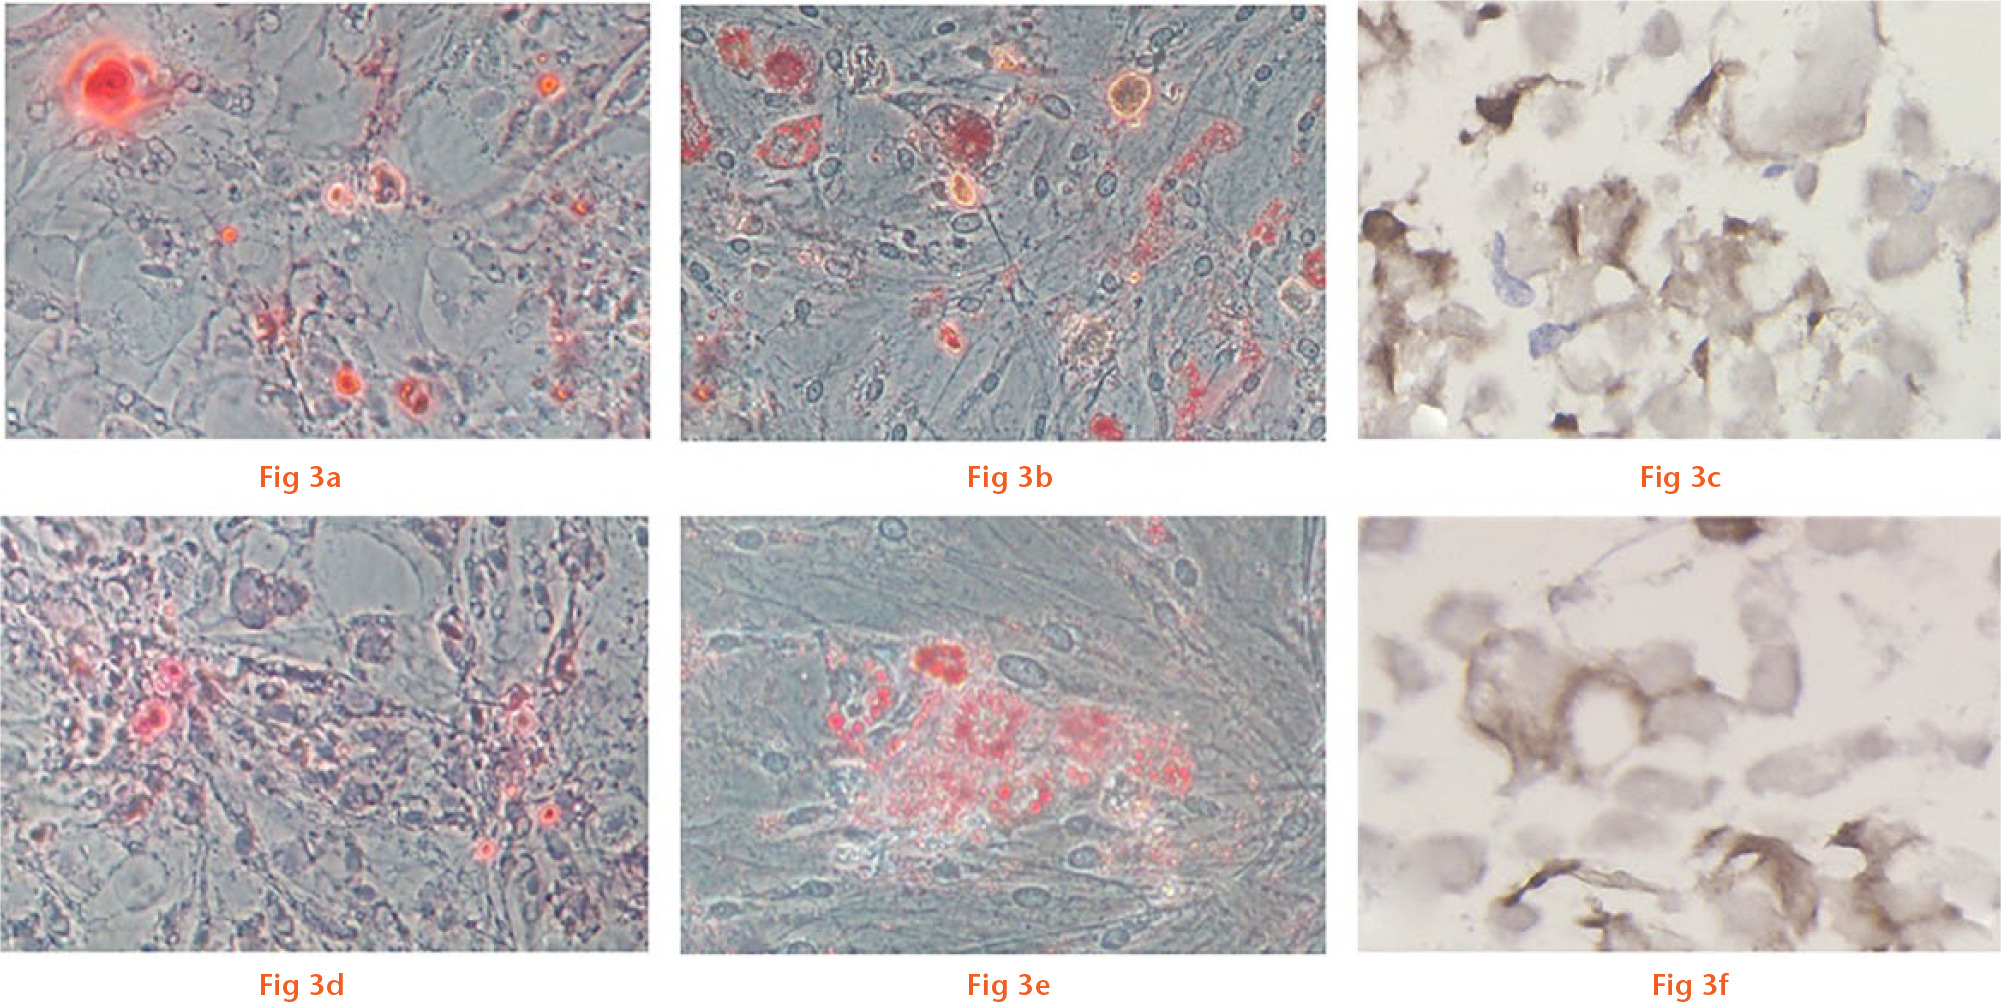  
            Multilineage differentiation potential of P3 cells that proliferated in normal medium (a to c) and P4 cells that proliferated in medium with low-dose G-CSF (d to f). Osteogenesis is detected by the deposition of calcium mineralisation using alizarin red staining (a, d, ×200). Adipogenesis is indicated by the accumulation of lipid vacuoles using oil red O staining (b, e, ×200). Chondrogenesis is indicated by the cartilage-specific matrix using collagen type II staining (c, f, ×400).
          